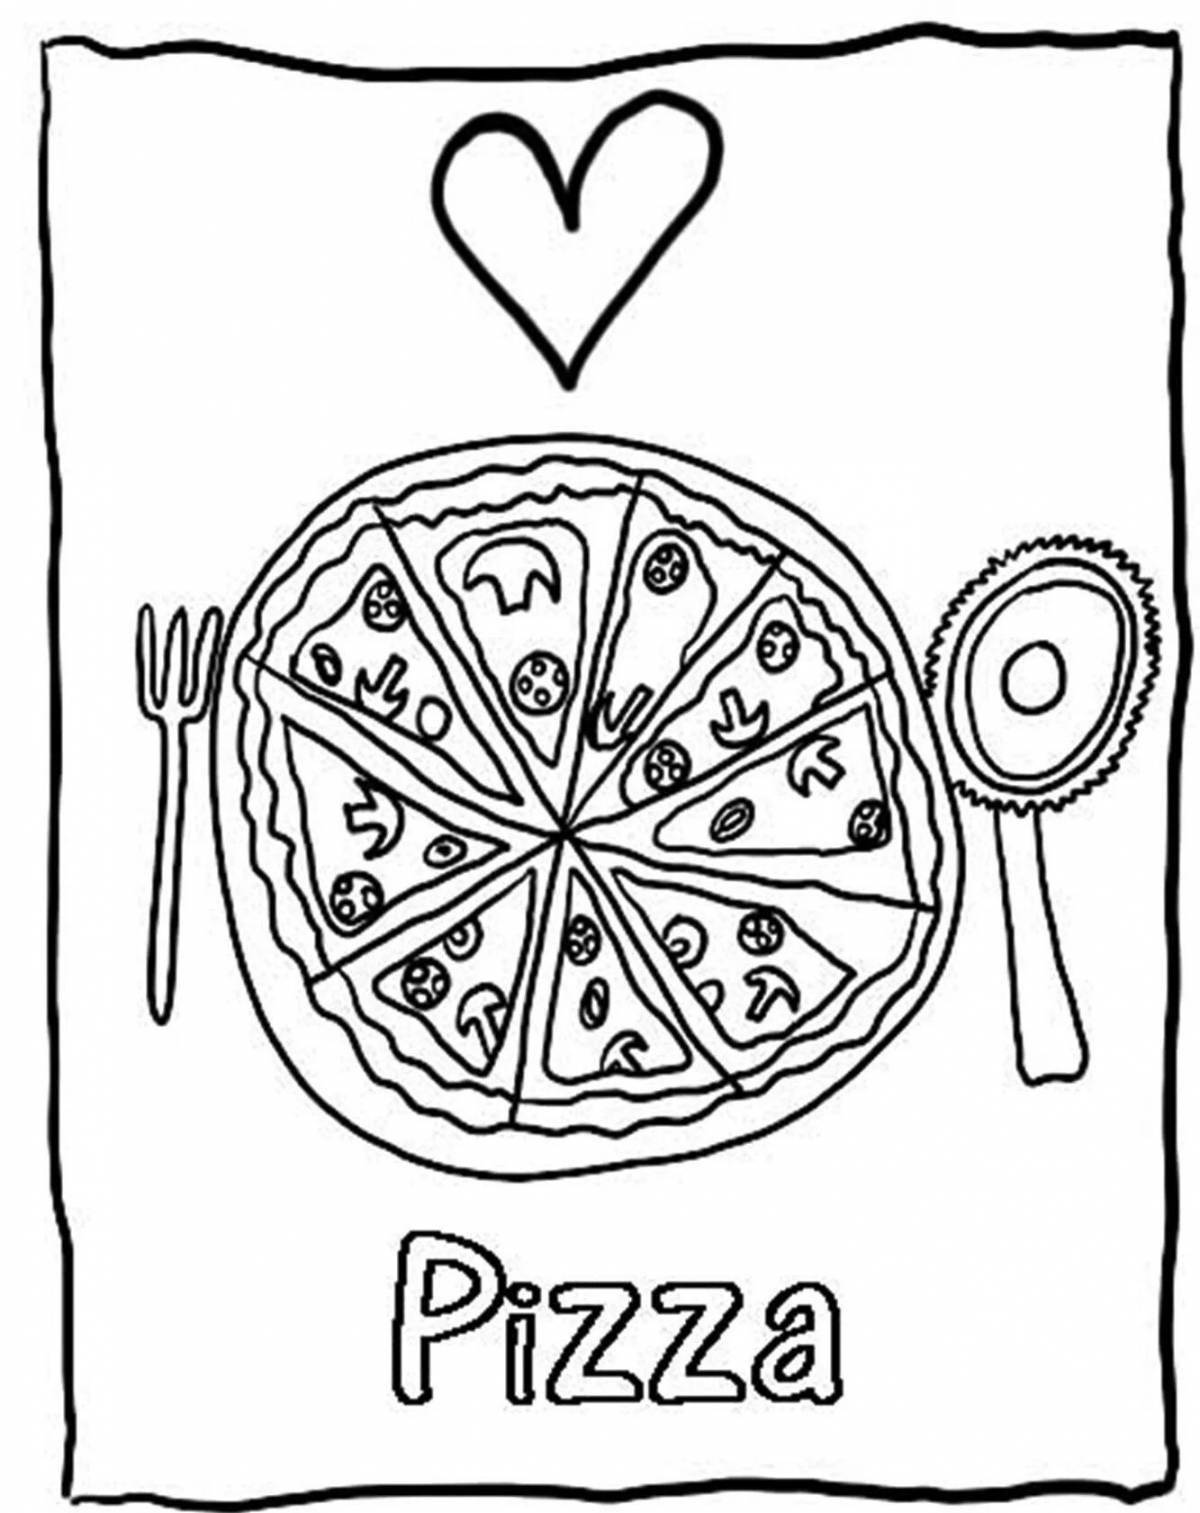 Intriguing pizza coloring page